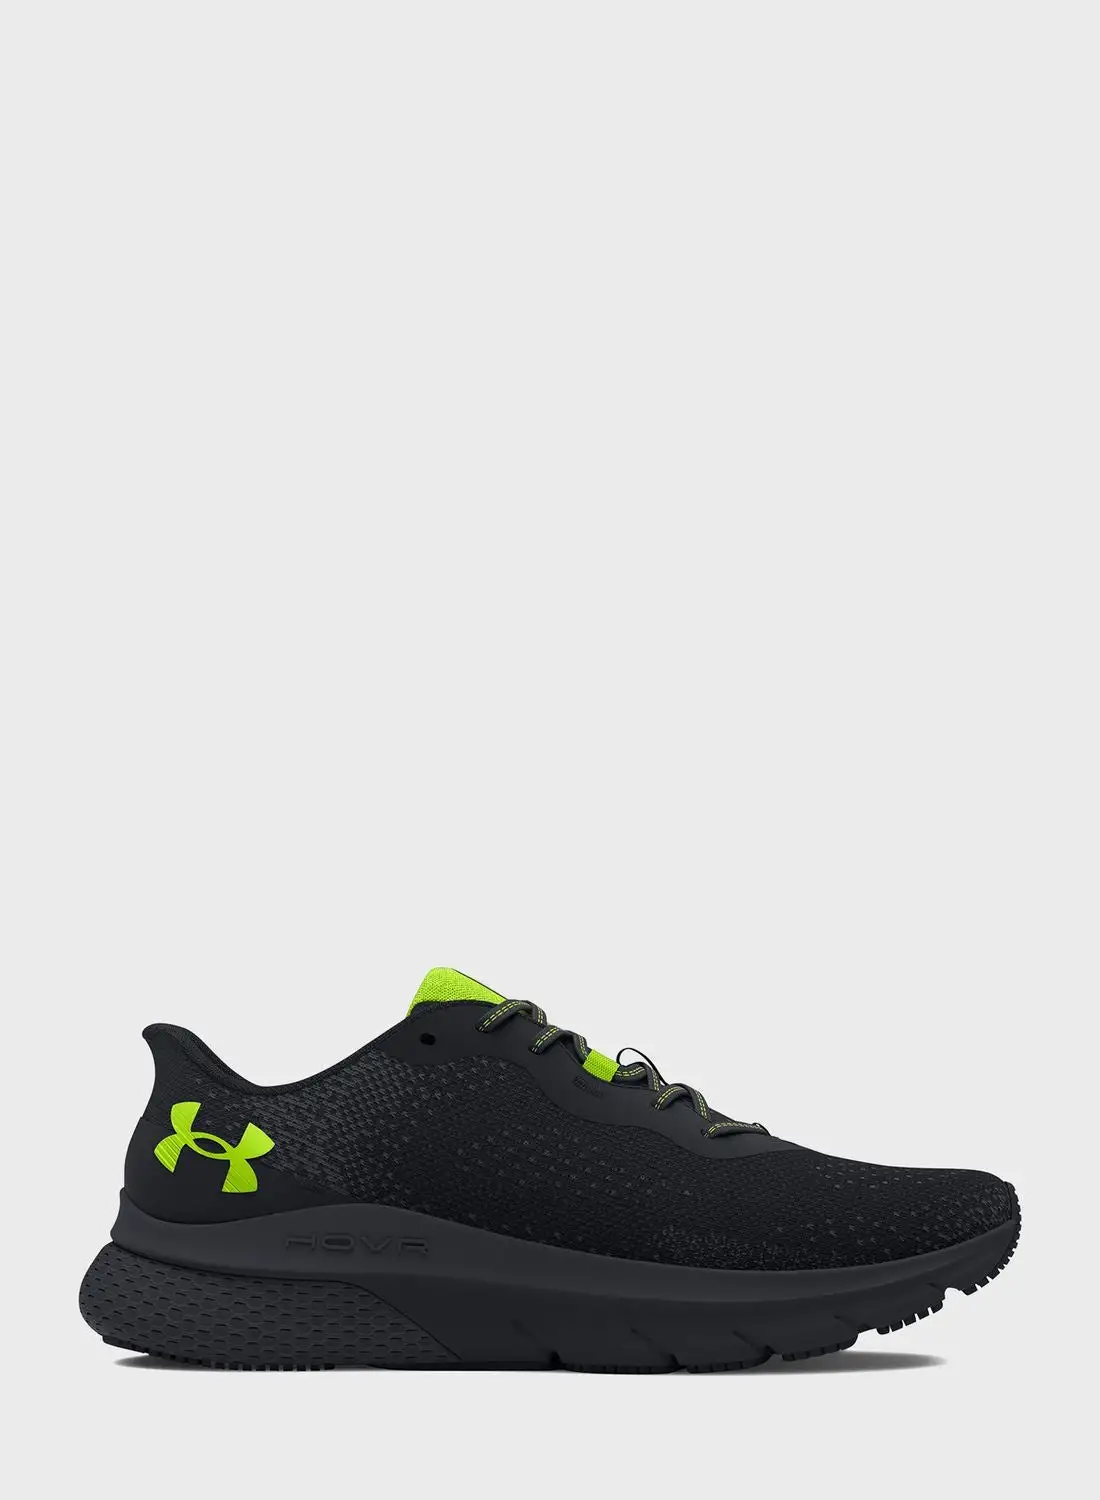 UNDER ARMOUR Hovr Turbulence 2 Running Shoes